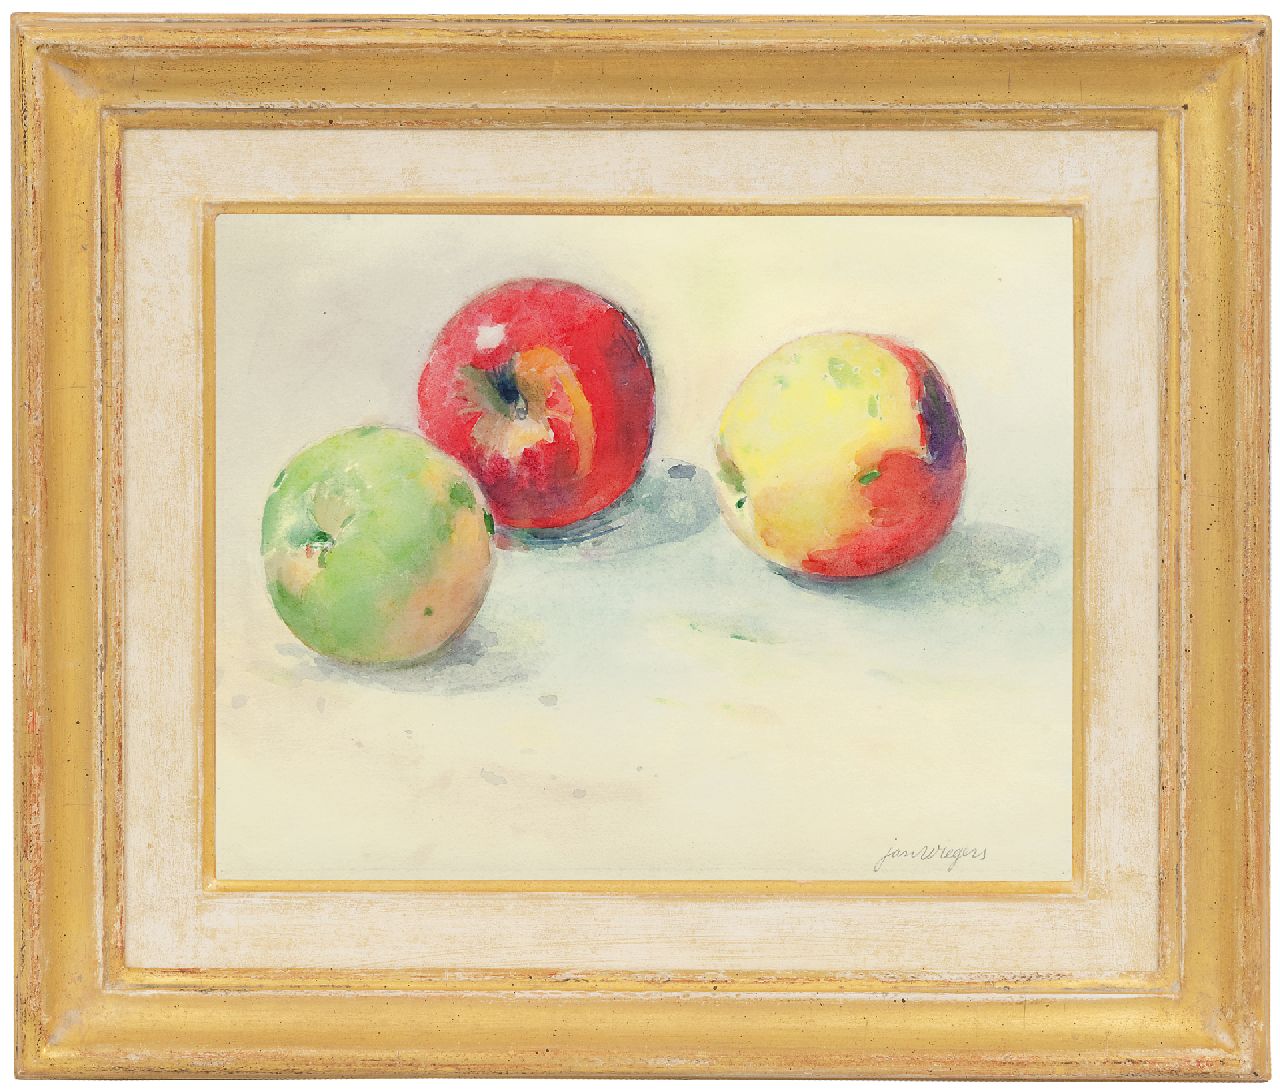 Wiegers J.  | Jan Wiegers, A still life with apples, watercolour on paper 21.8 x 27.5 cm, signed l.r.